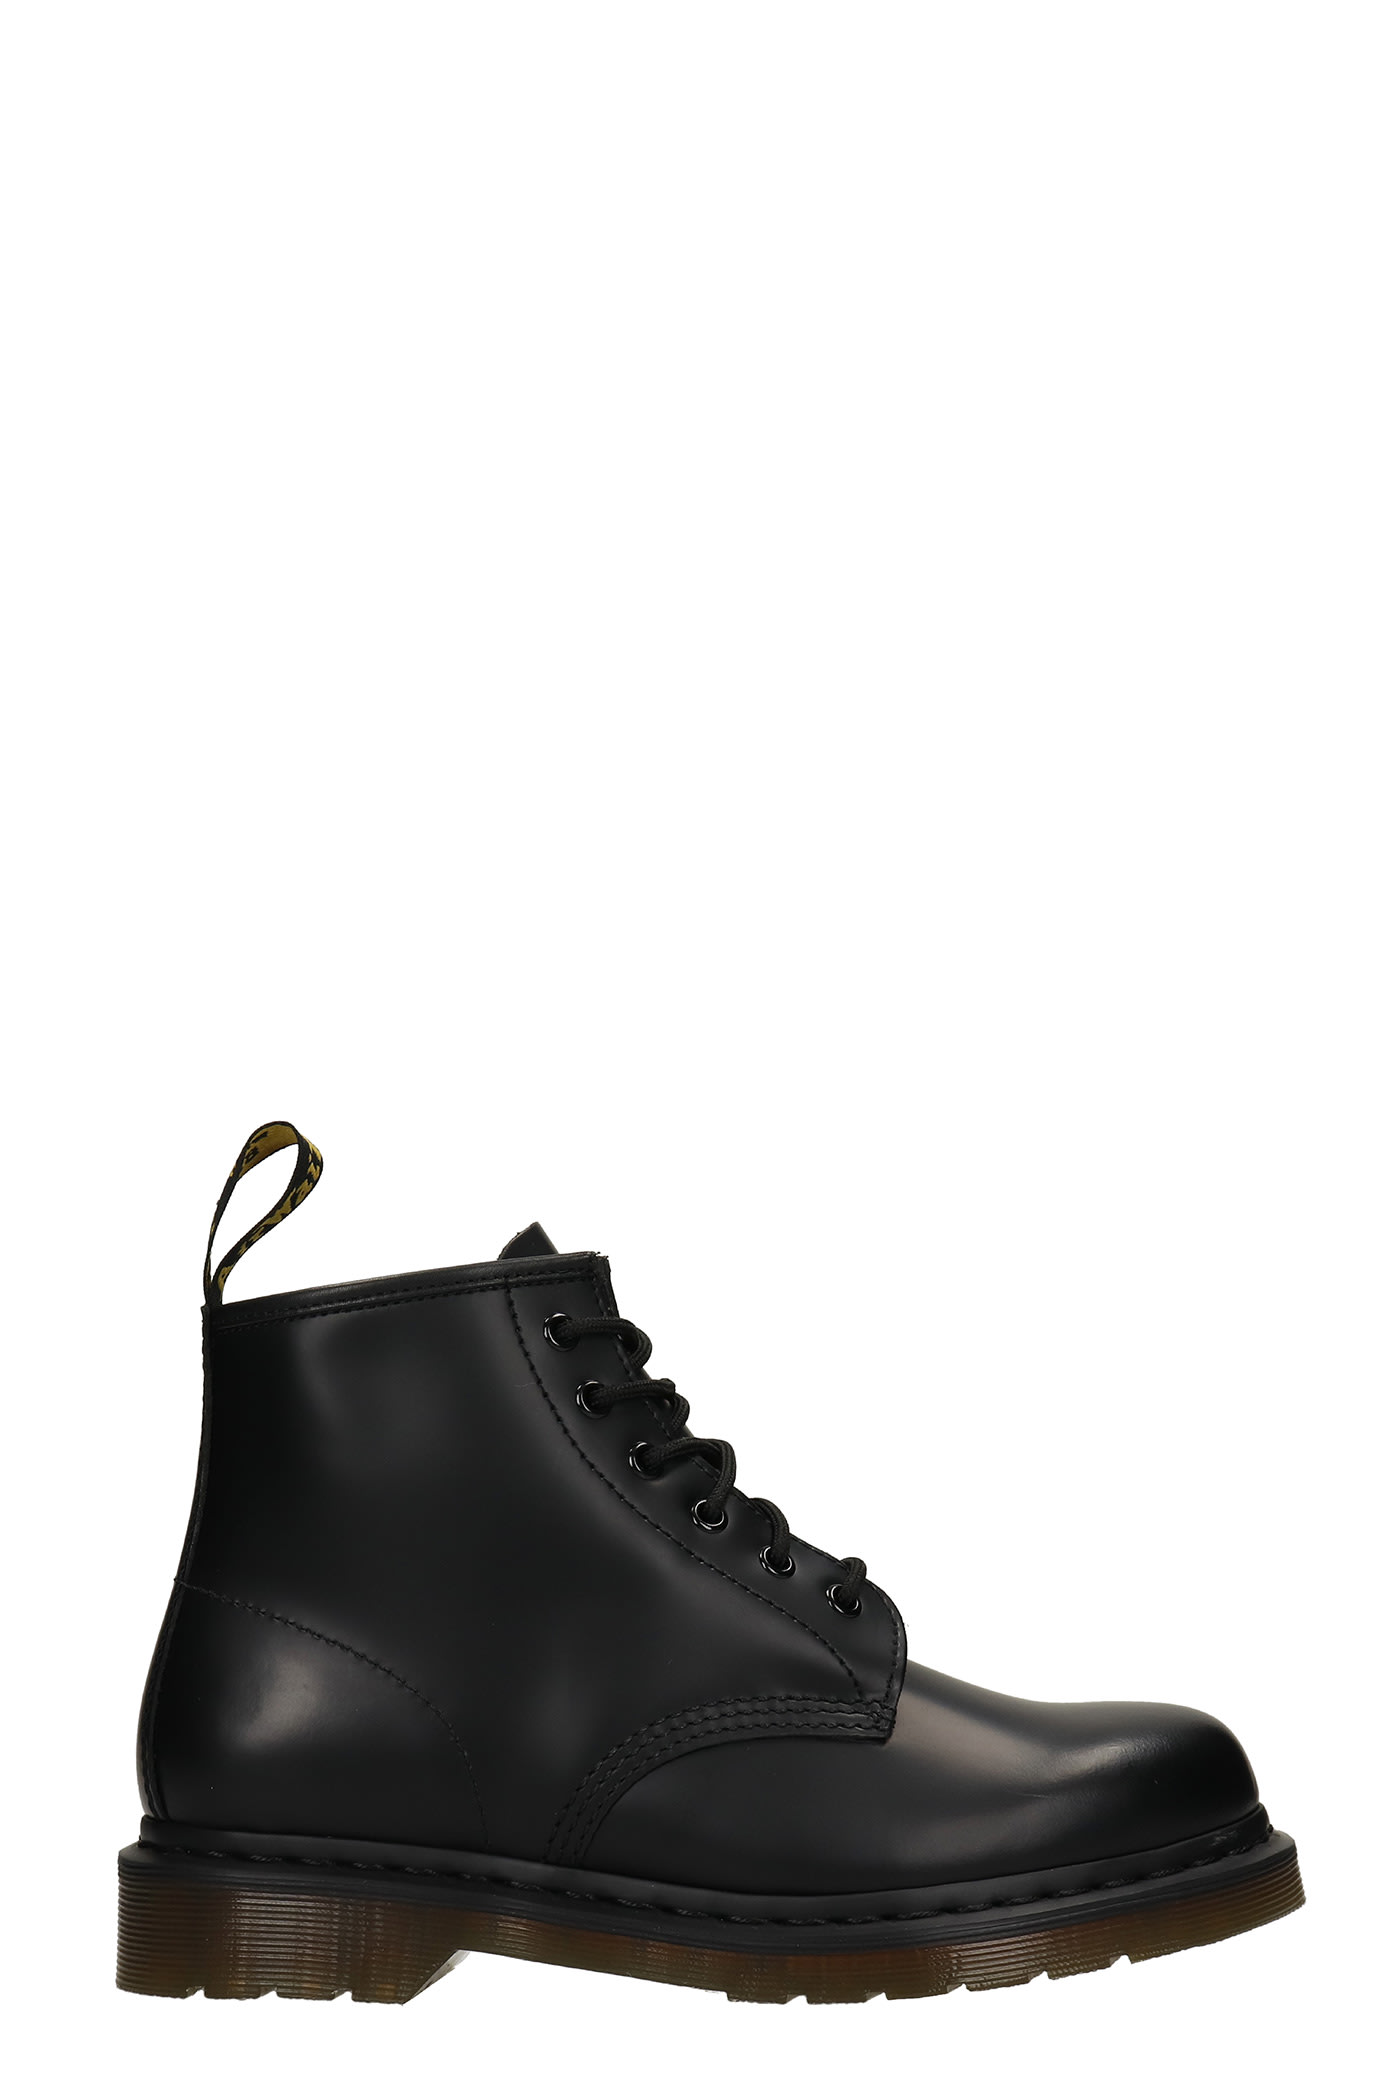 Dr. Martens 101 Combat Boots In Black Leather